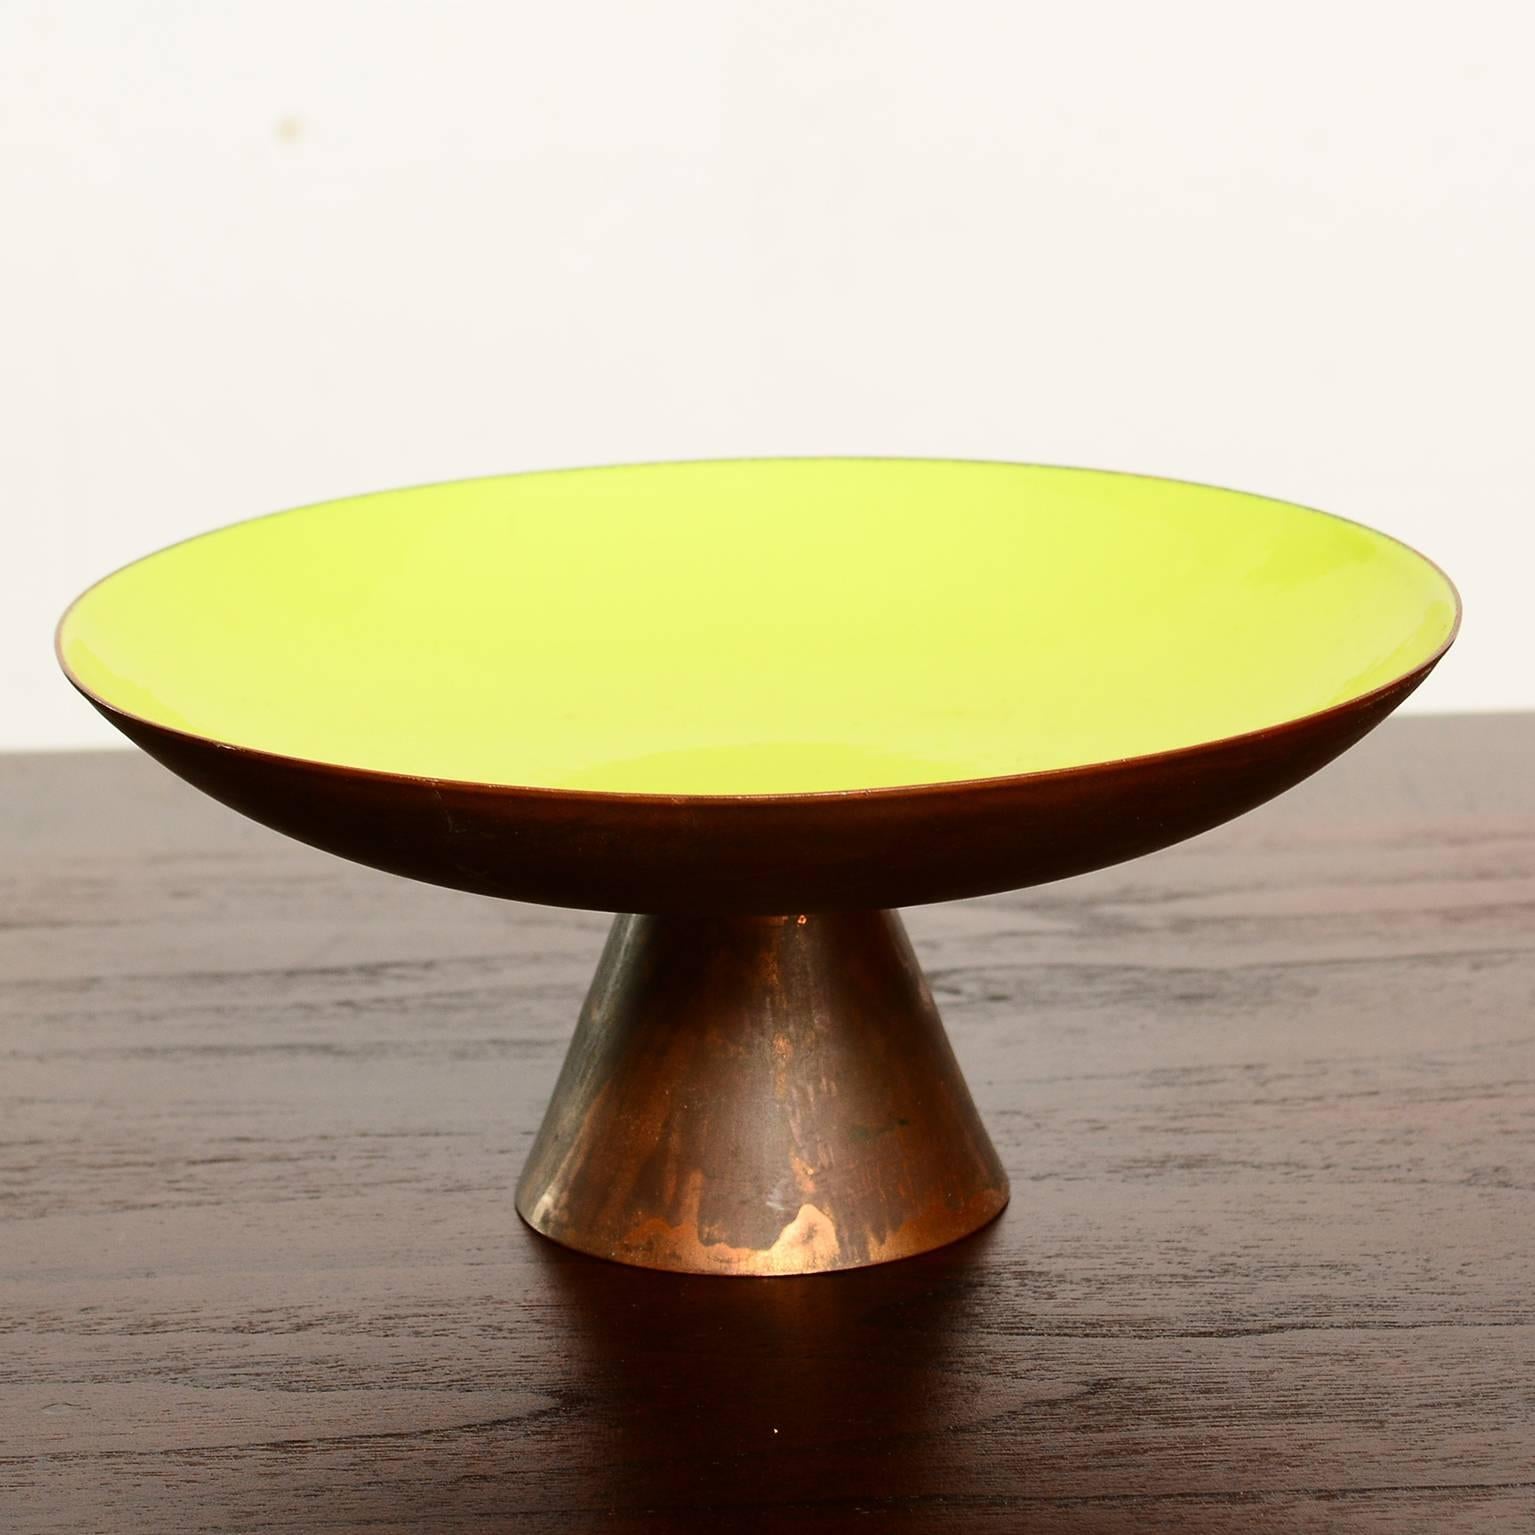 For your consideration a beautiful enamel on copper dish. 
The dish has a bright yellow color. The outside is copper with vintage patina. 
Unsigned.